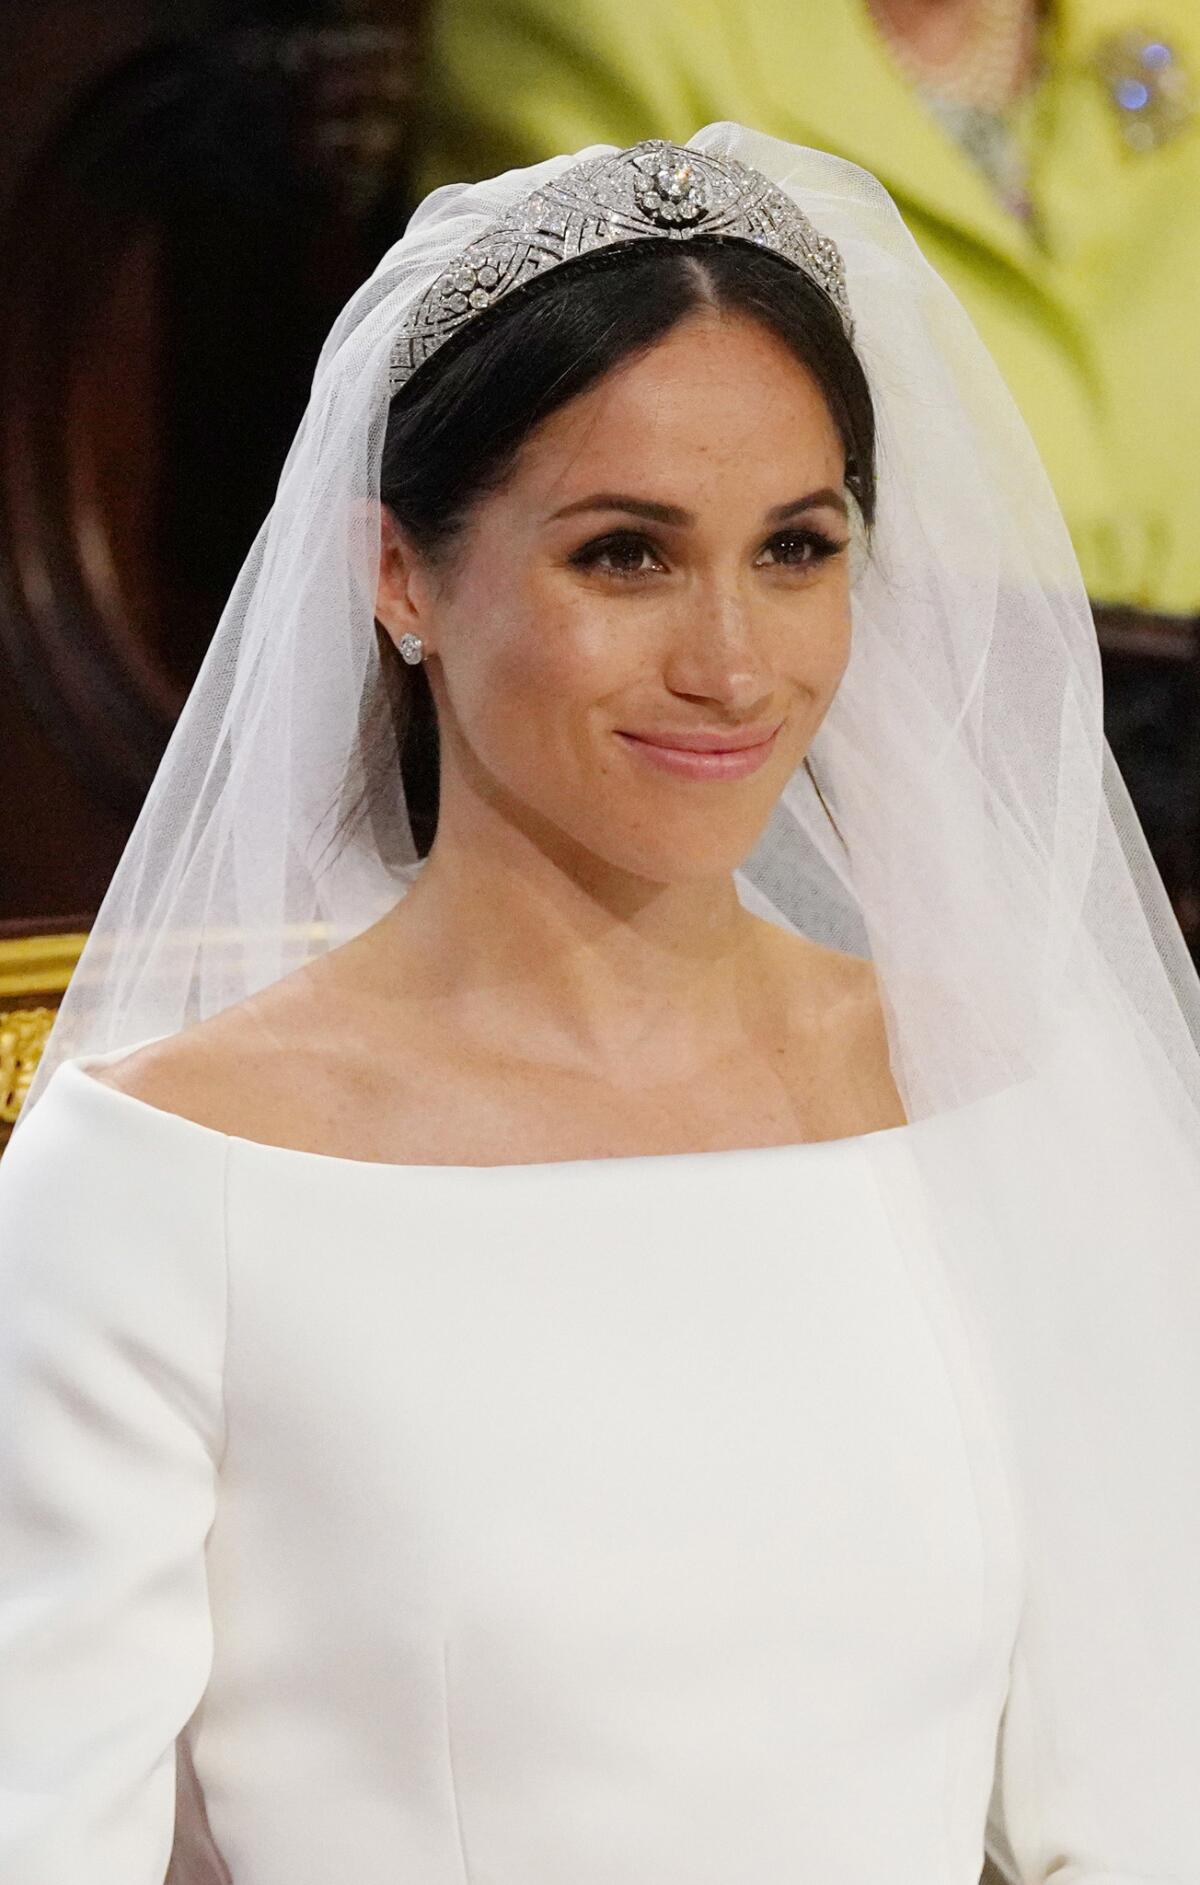 Meghan Markle wore a diamond tiara for her wedding to Prince Harry on Saturday. Here, the bride, a former "Suits" actress, stands at the altar during the ceremony in St. George's Chapel at Windsor Castle.